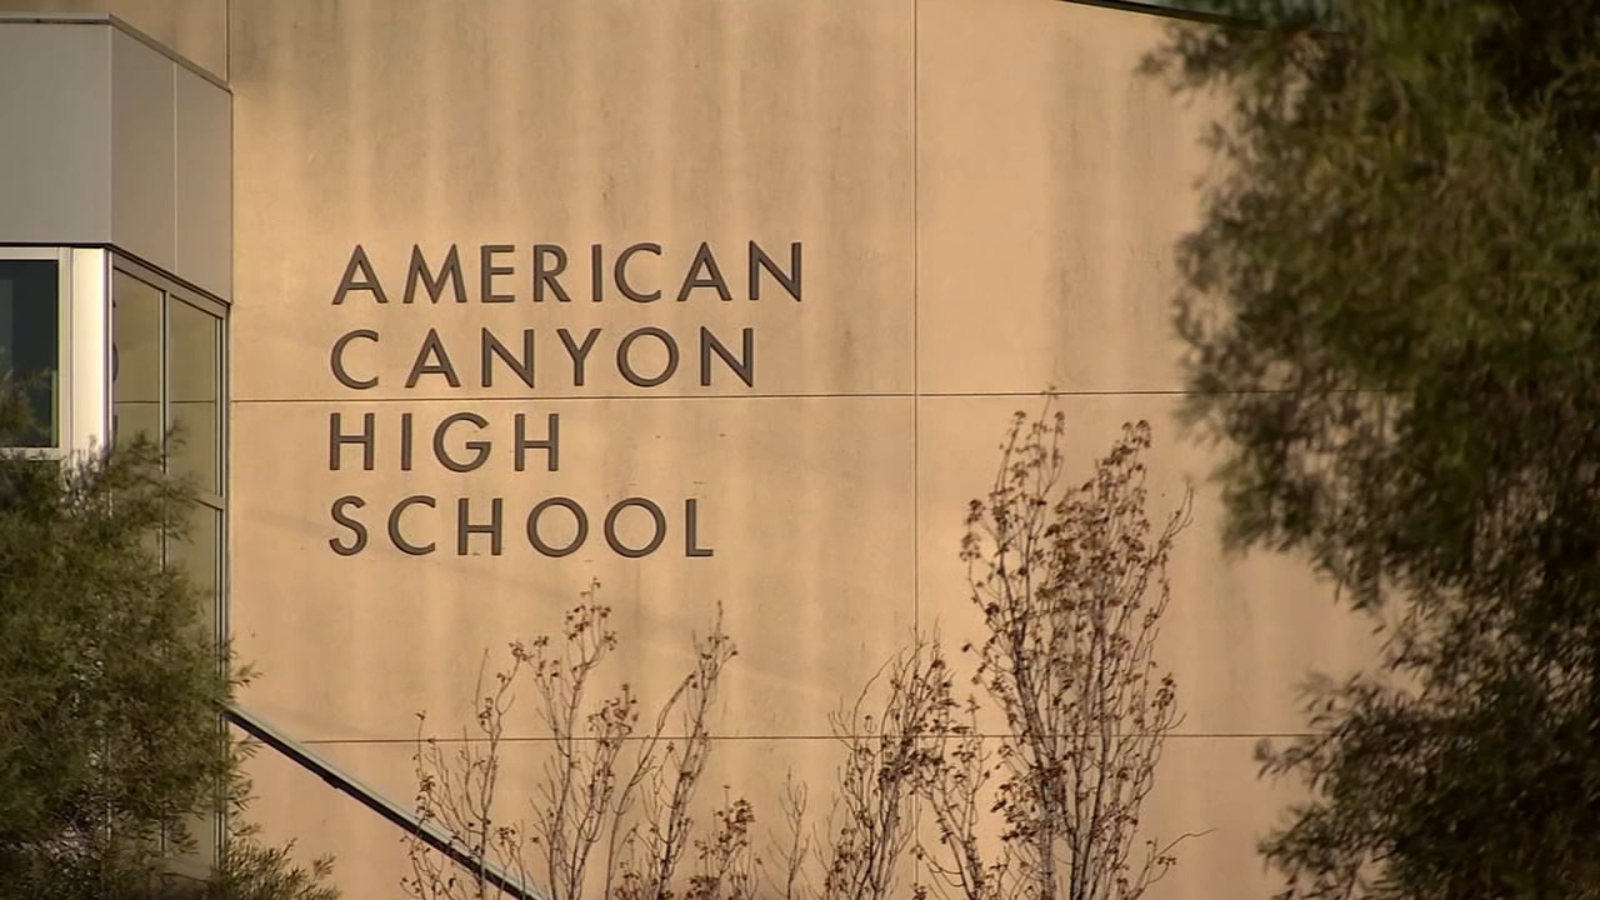 American Canyon High School P.E. teacher charged with 21 felony sex crimes against female student [Video]